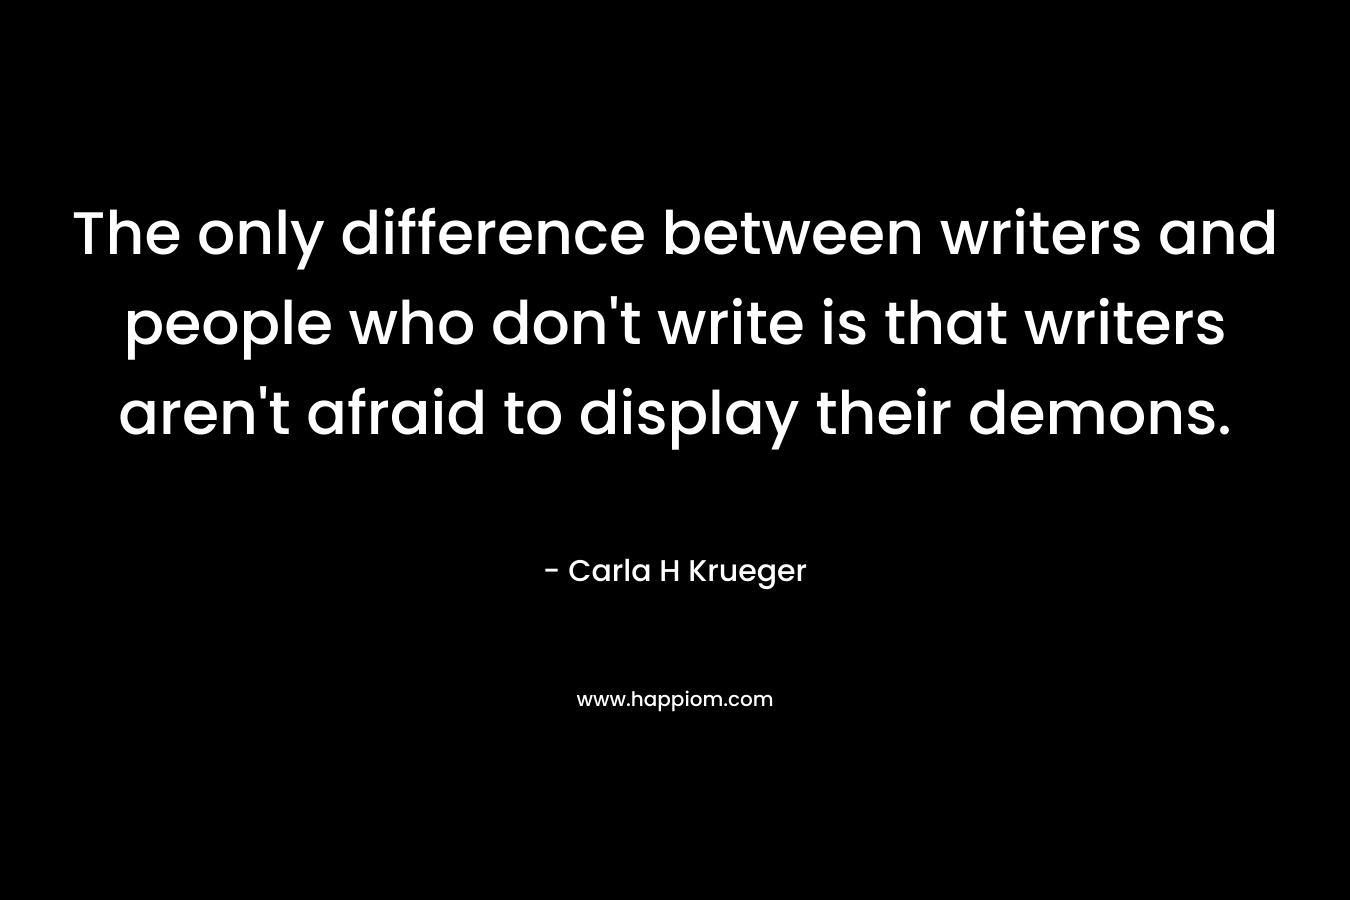 The only difference between writers and people who don't write is that writers aren't afraid to display their demons.